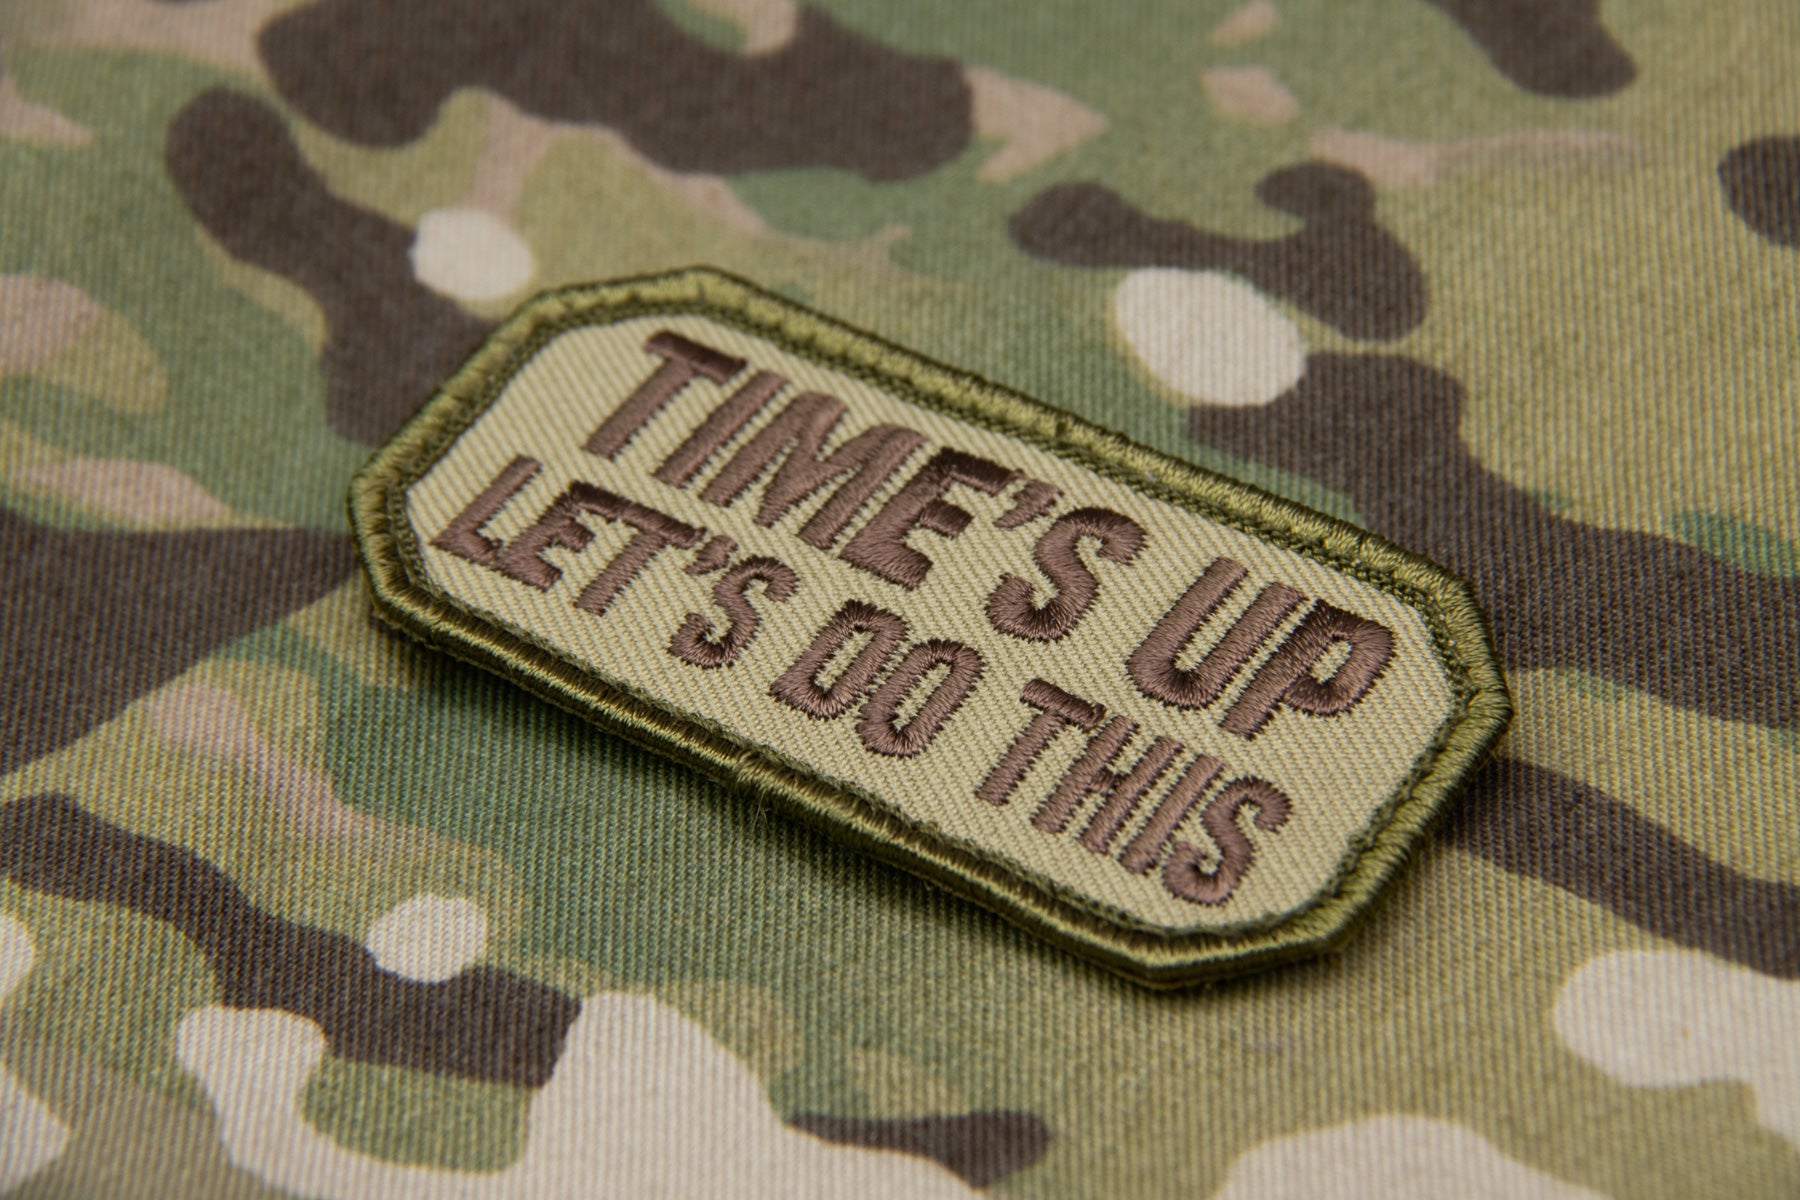 MSM Times Up Morale Patch - ssairsoft.com